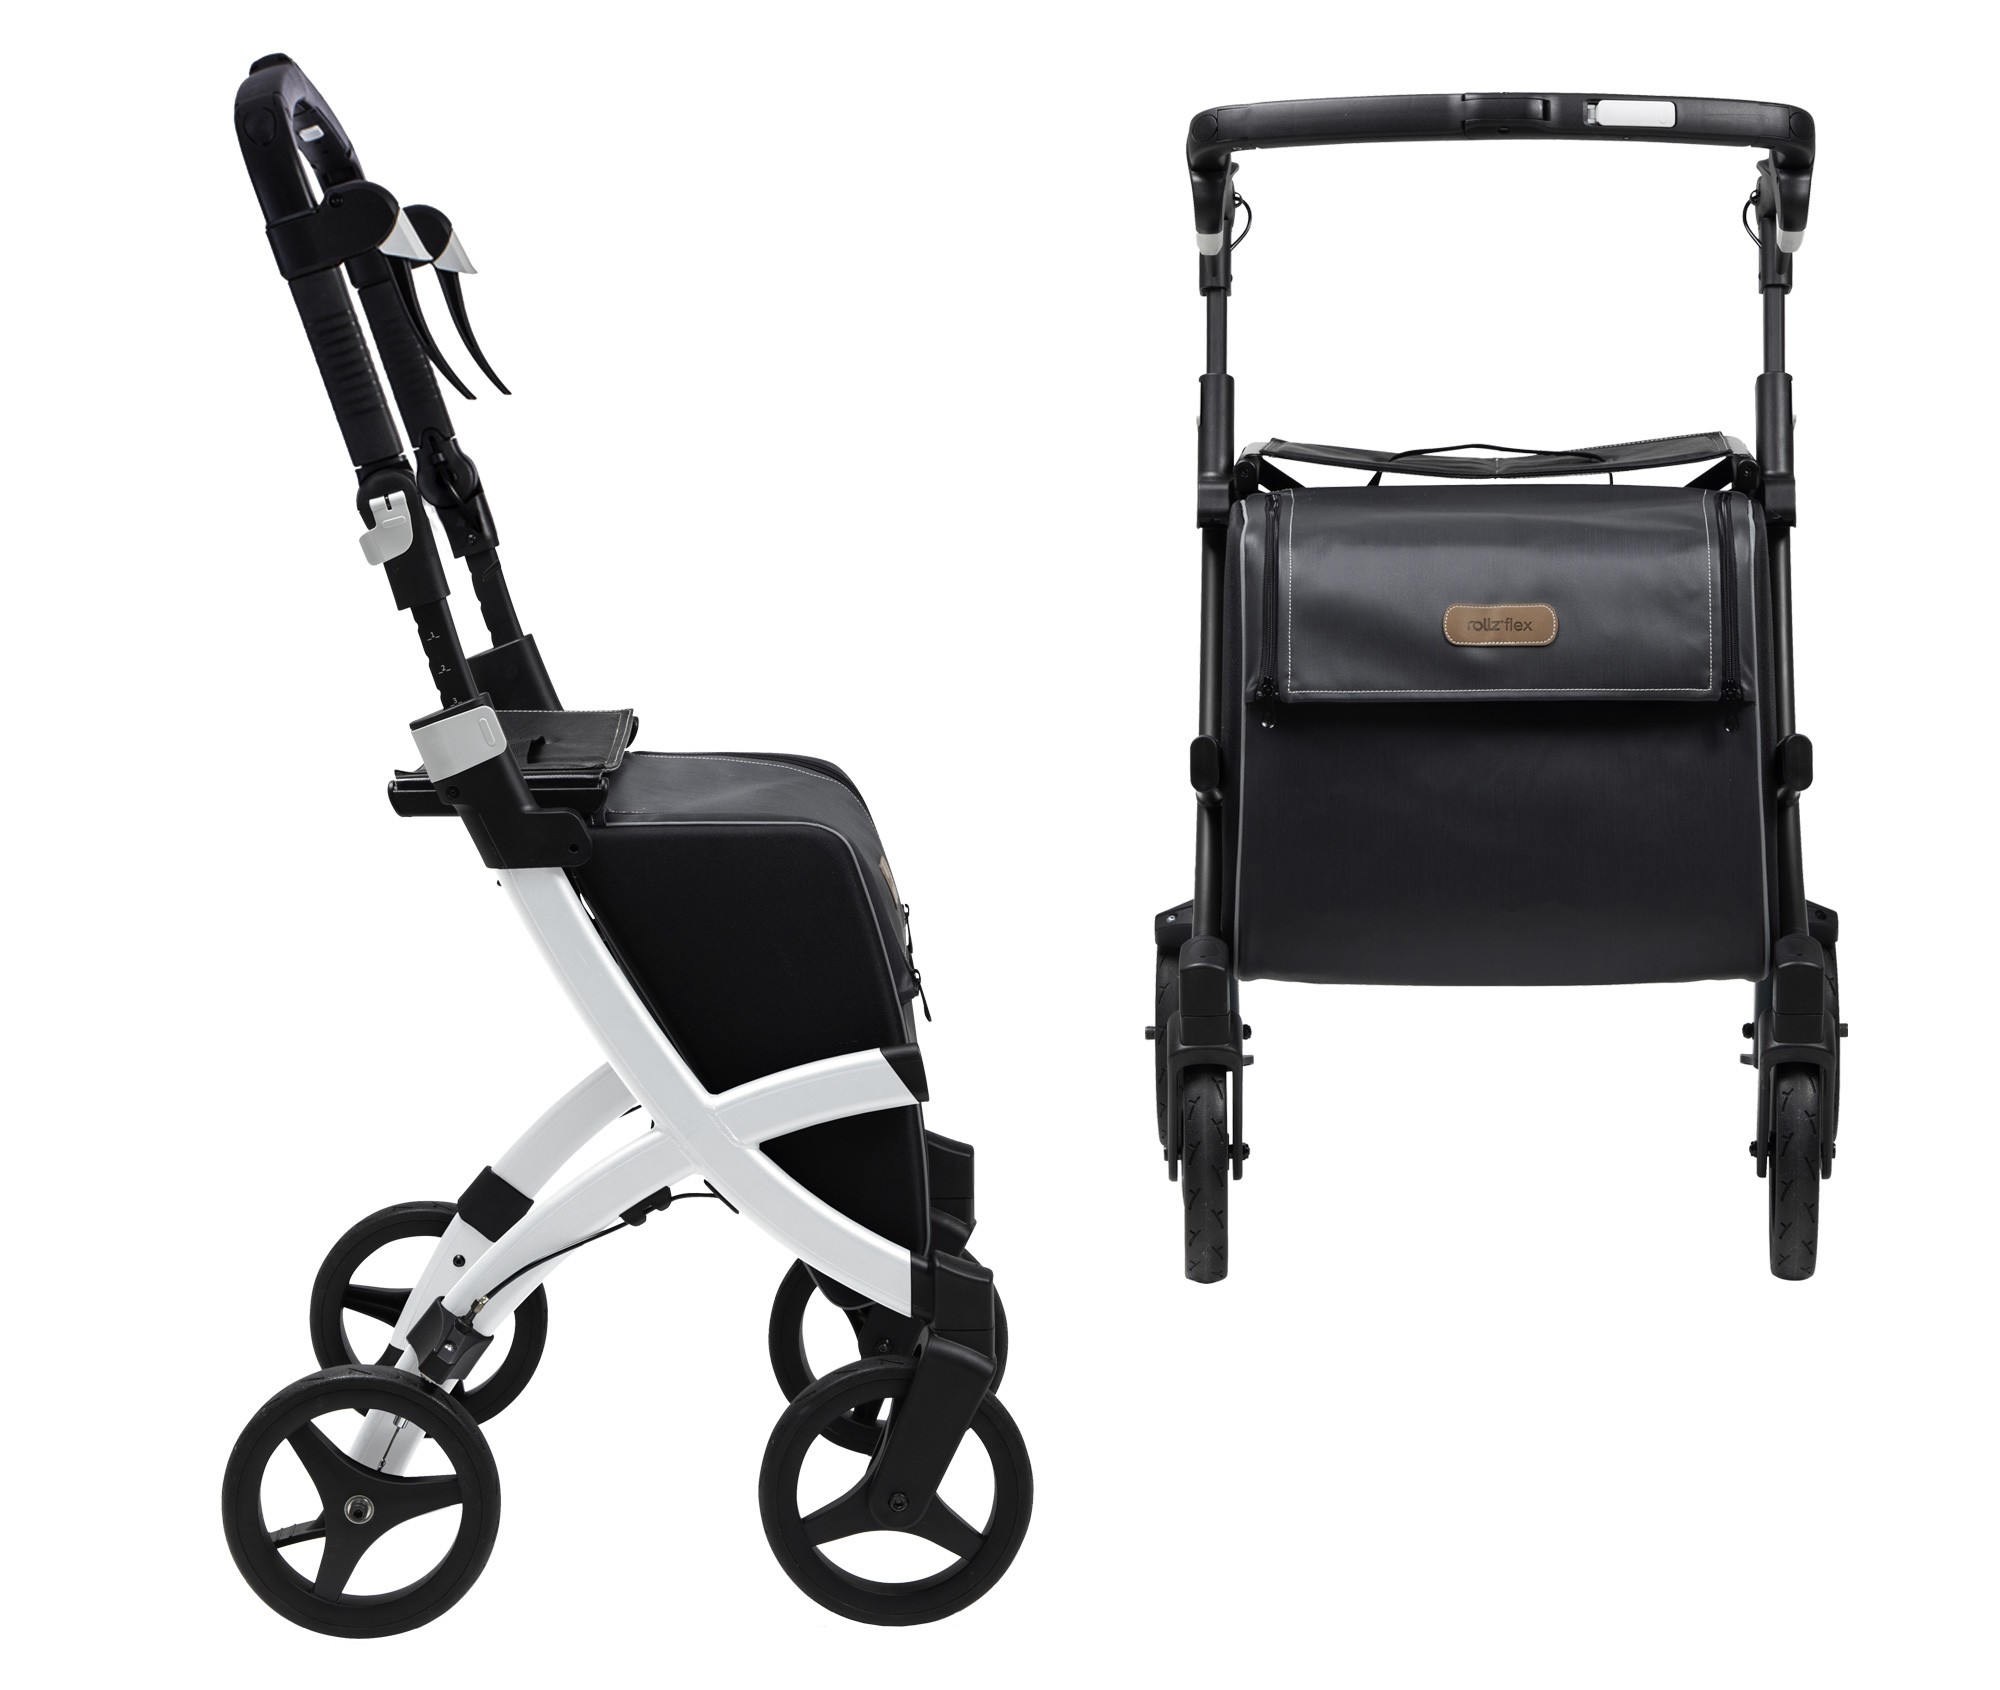 Rollz rollators come in two sizes: regular and small